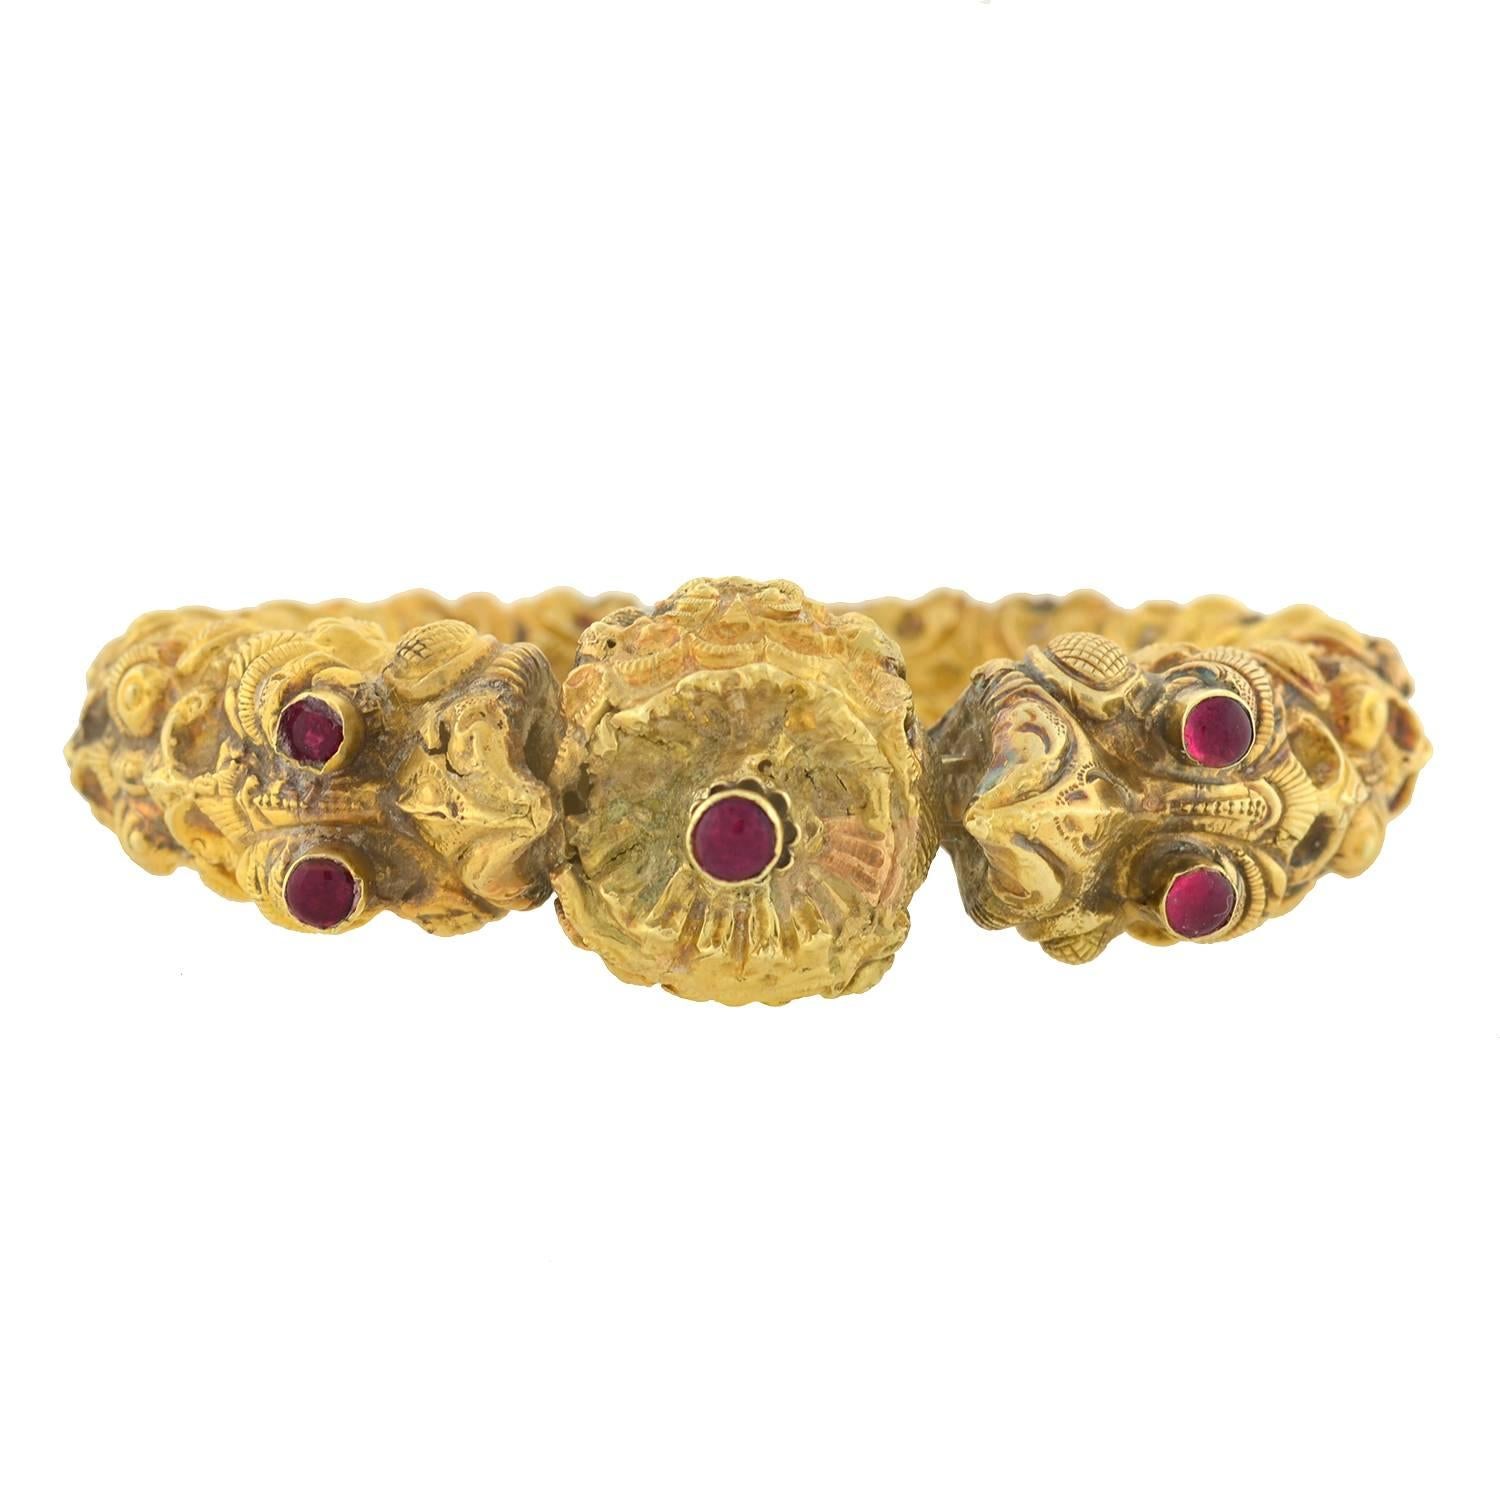 A rare and magnificent Indian bracelet from the Early Victorian (ca1850) era! The bracelet is remarkably substantial, both in size and appearance. Handcrafted in 18kt yellow gold, it has a mythological bird motif, which is richly detailed with a